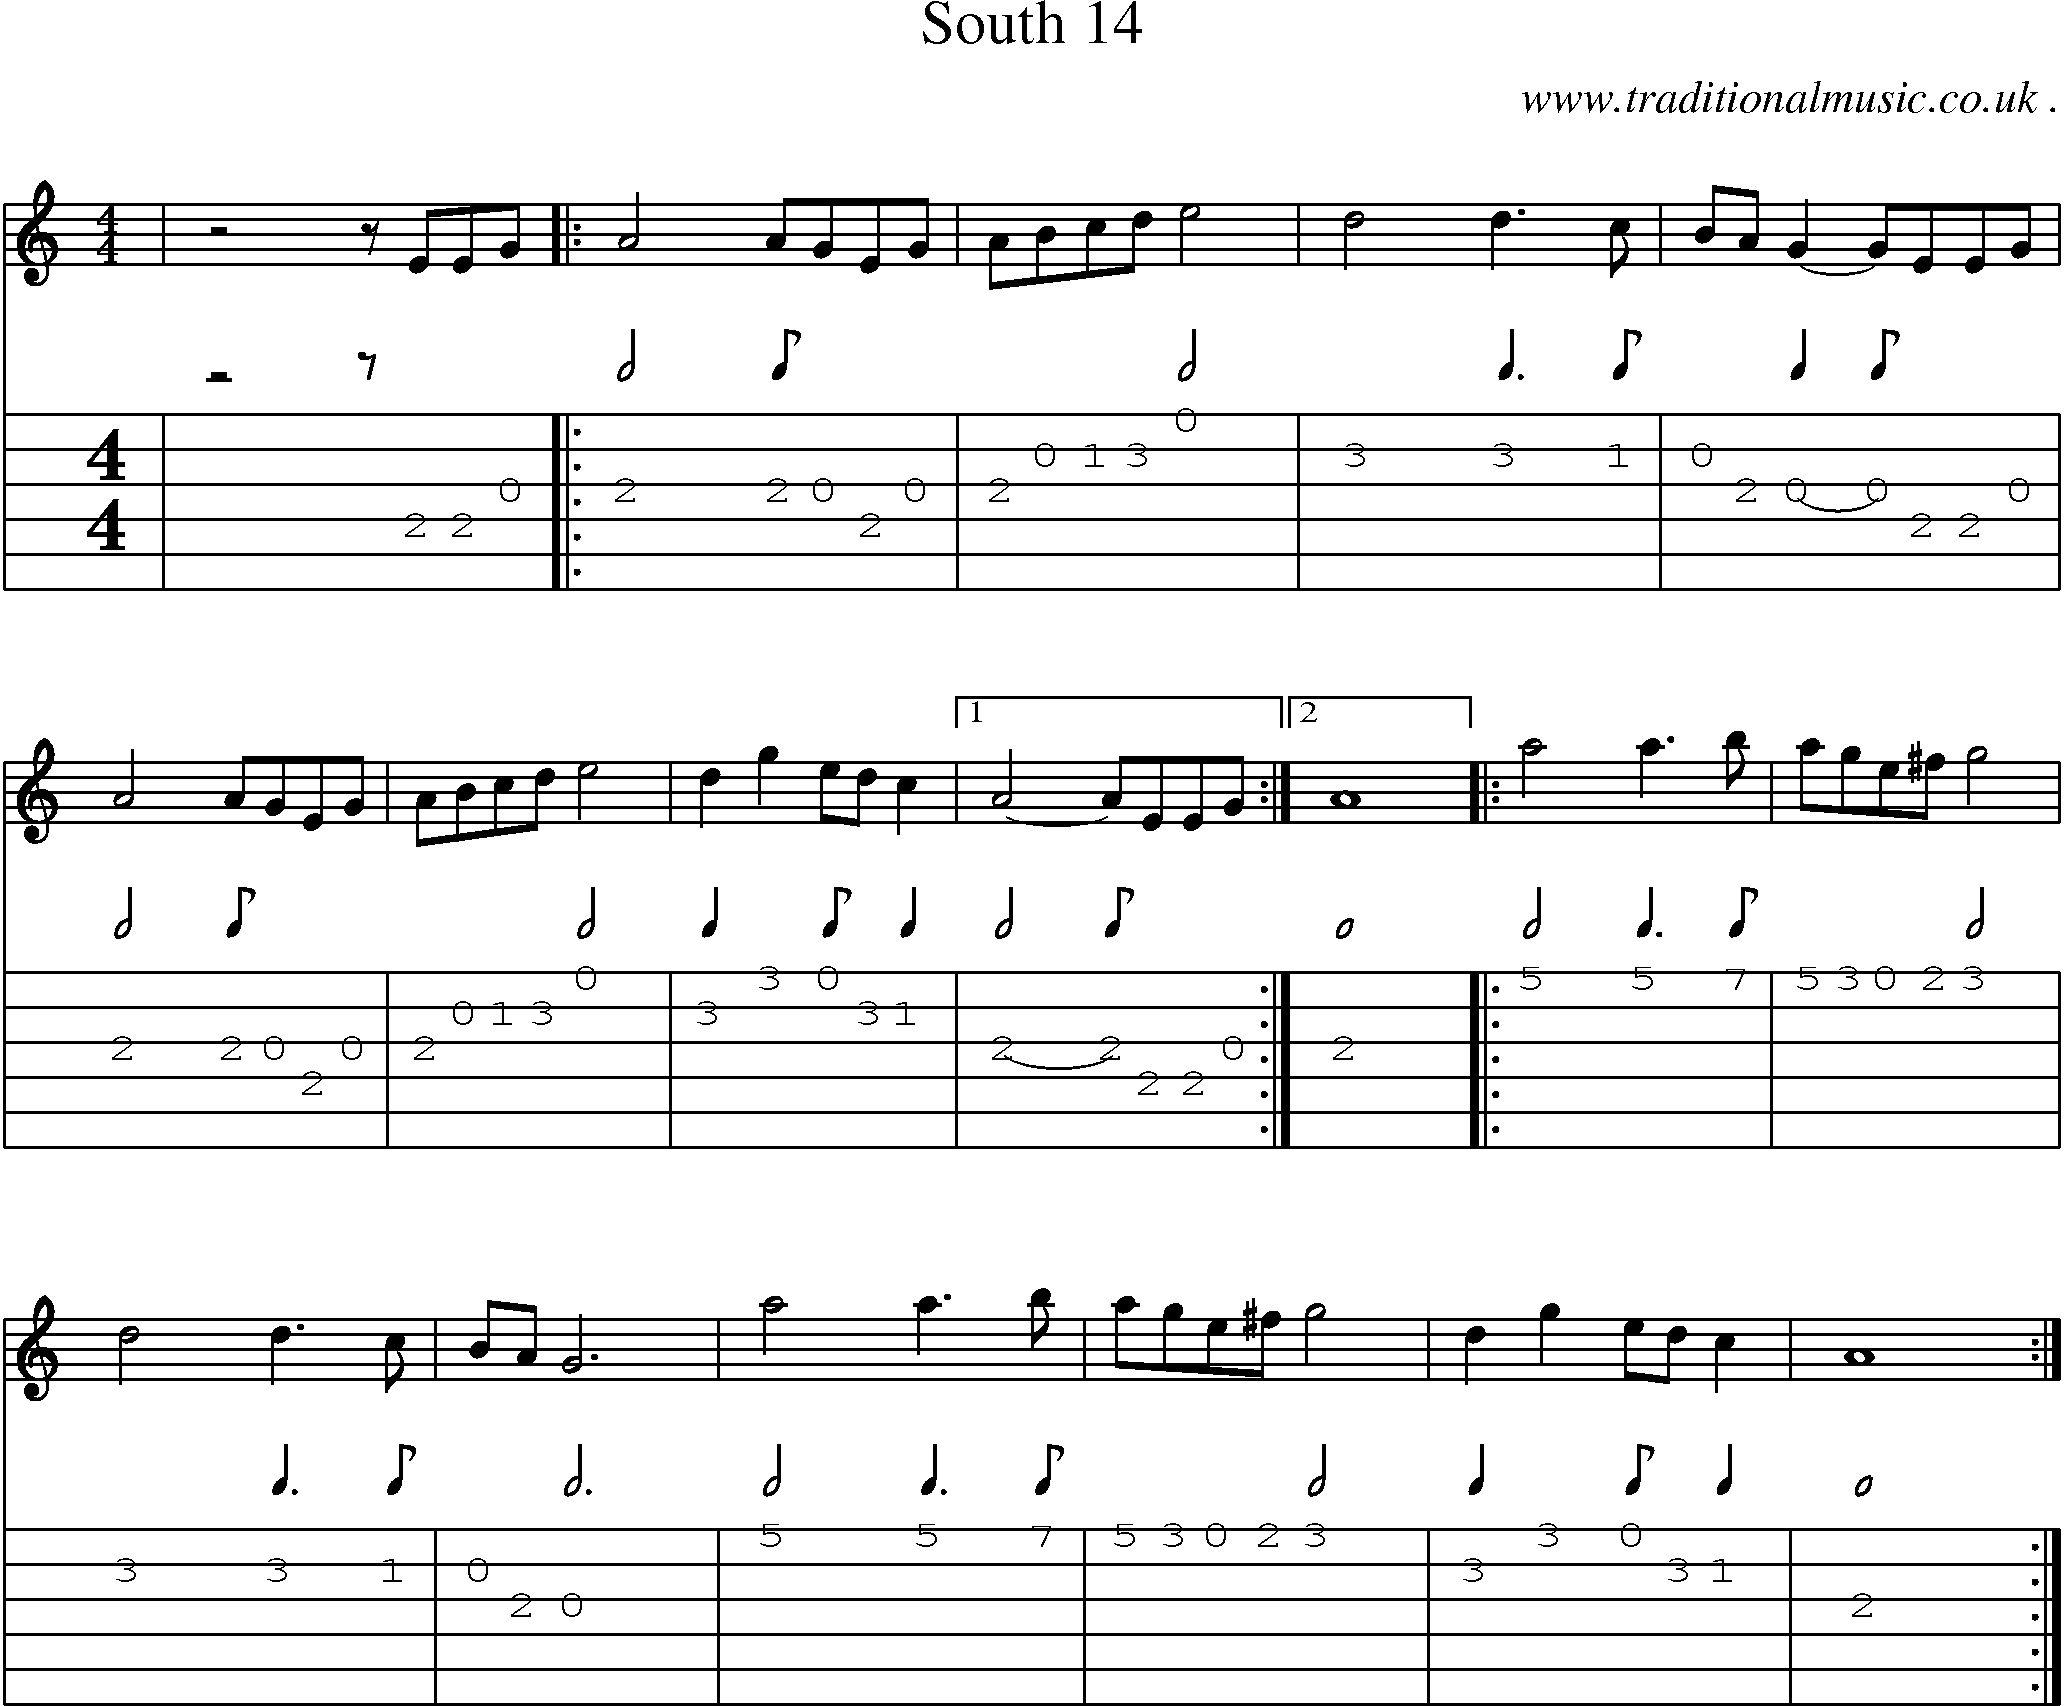 Music Score and Guitar Tabs for South 14